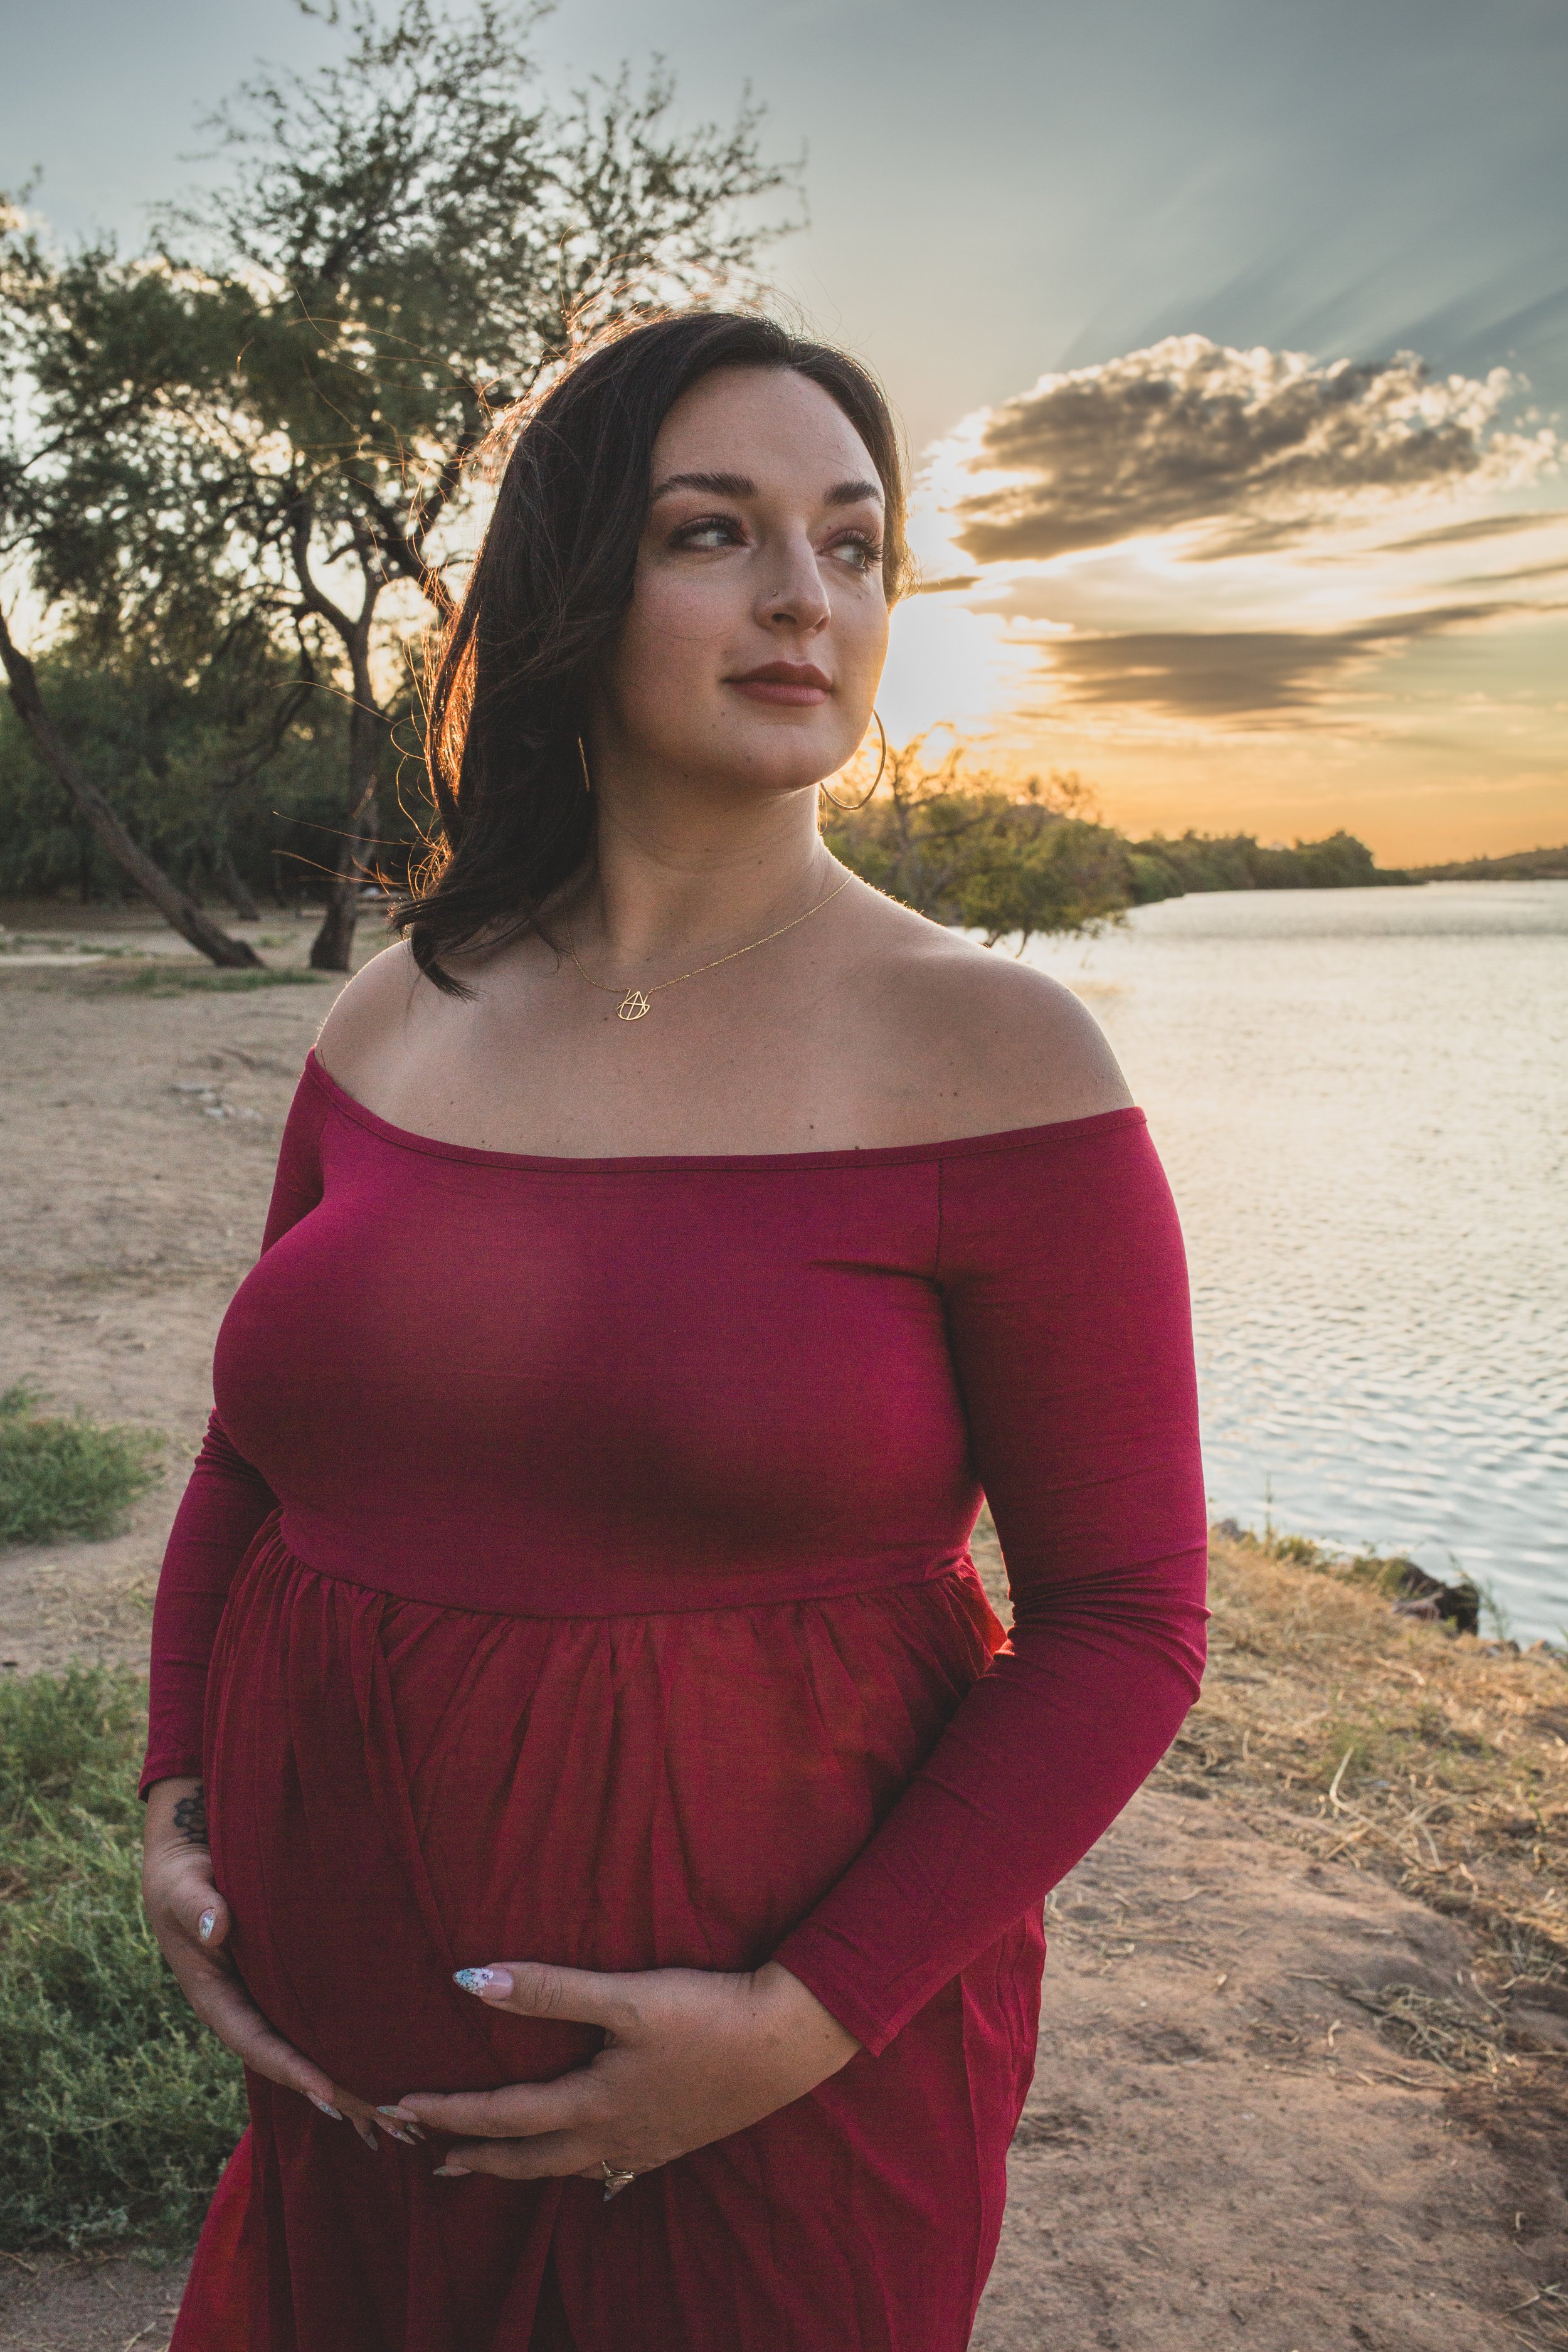 Mother-to-be's poses with her pregnant belly in a red dress at Sunset for maternity photos in front of the Salt River by maternity photographer in Phoenix; Jennifer Lind Schutsky.